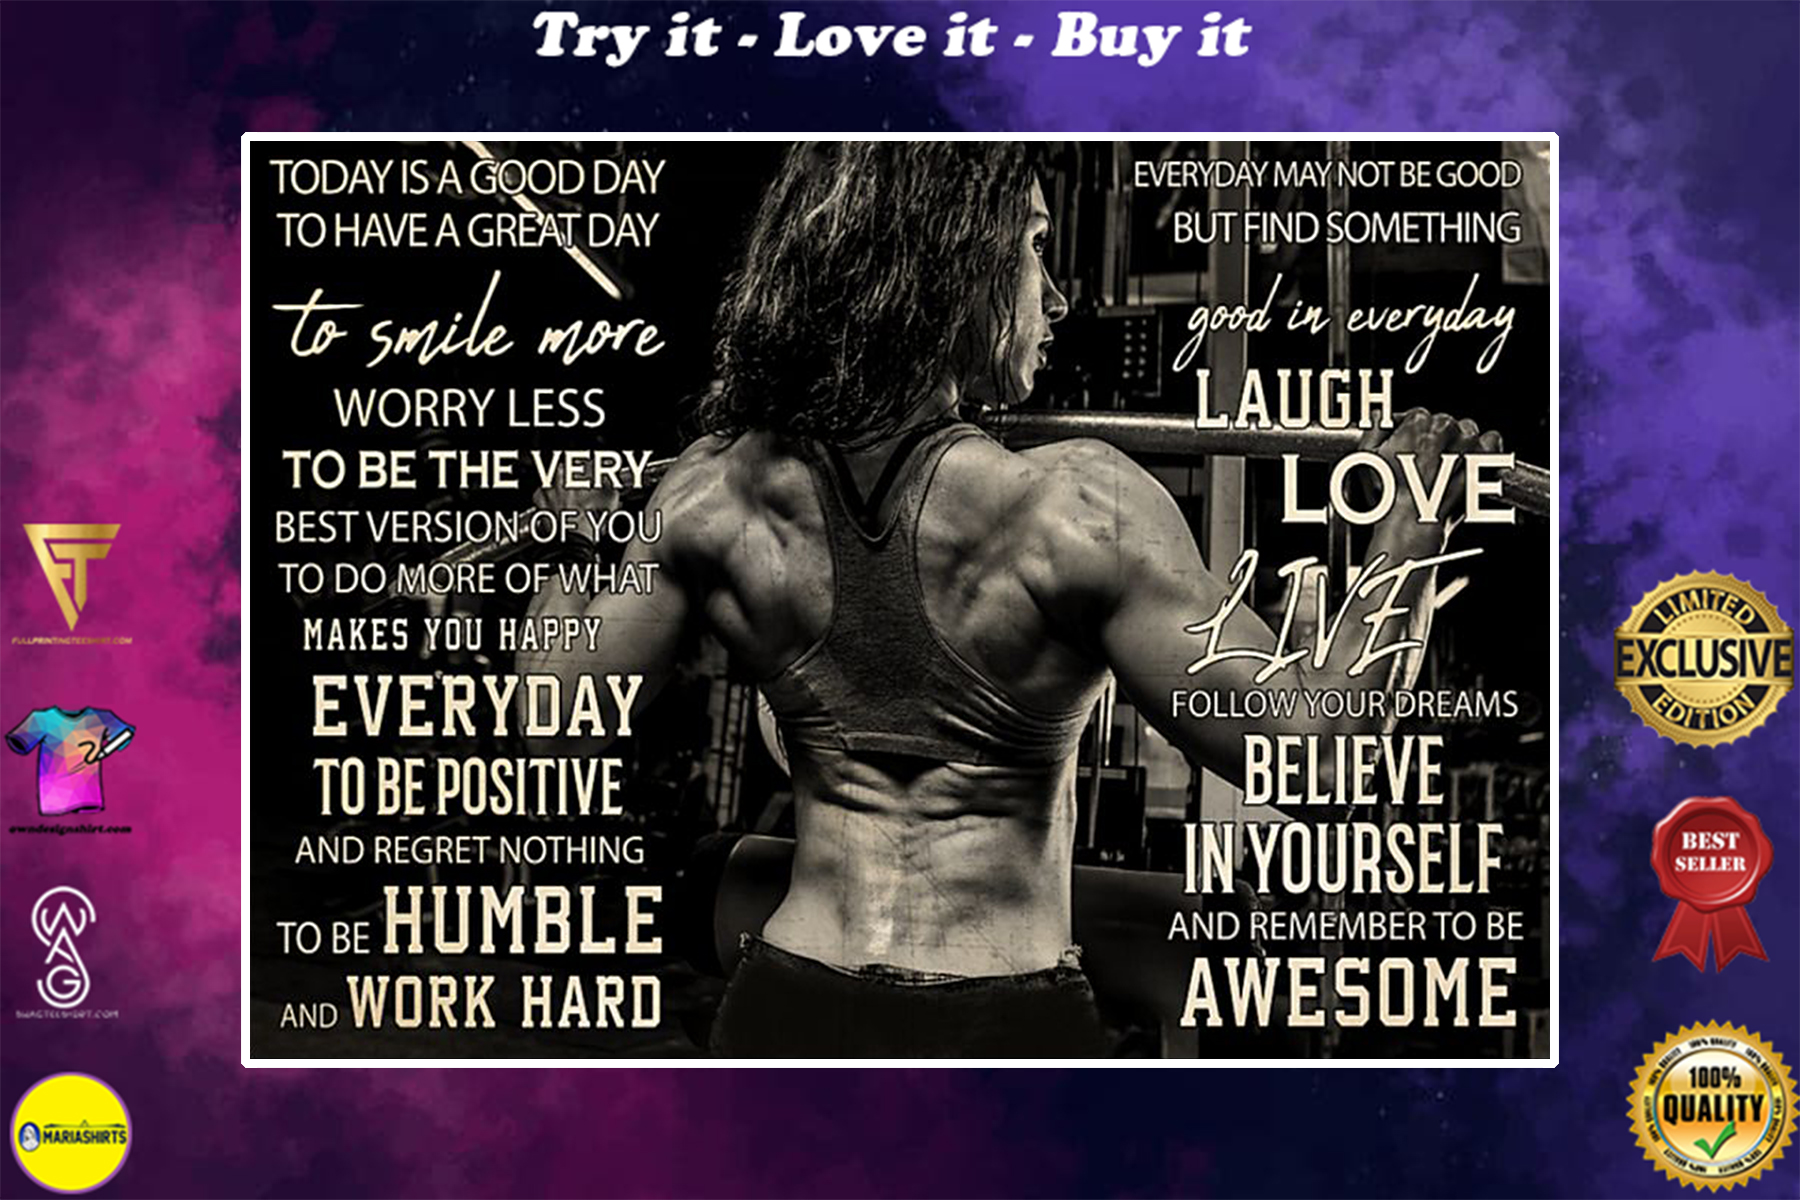 girl bodybuilding today is a good day to have a great day poster